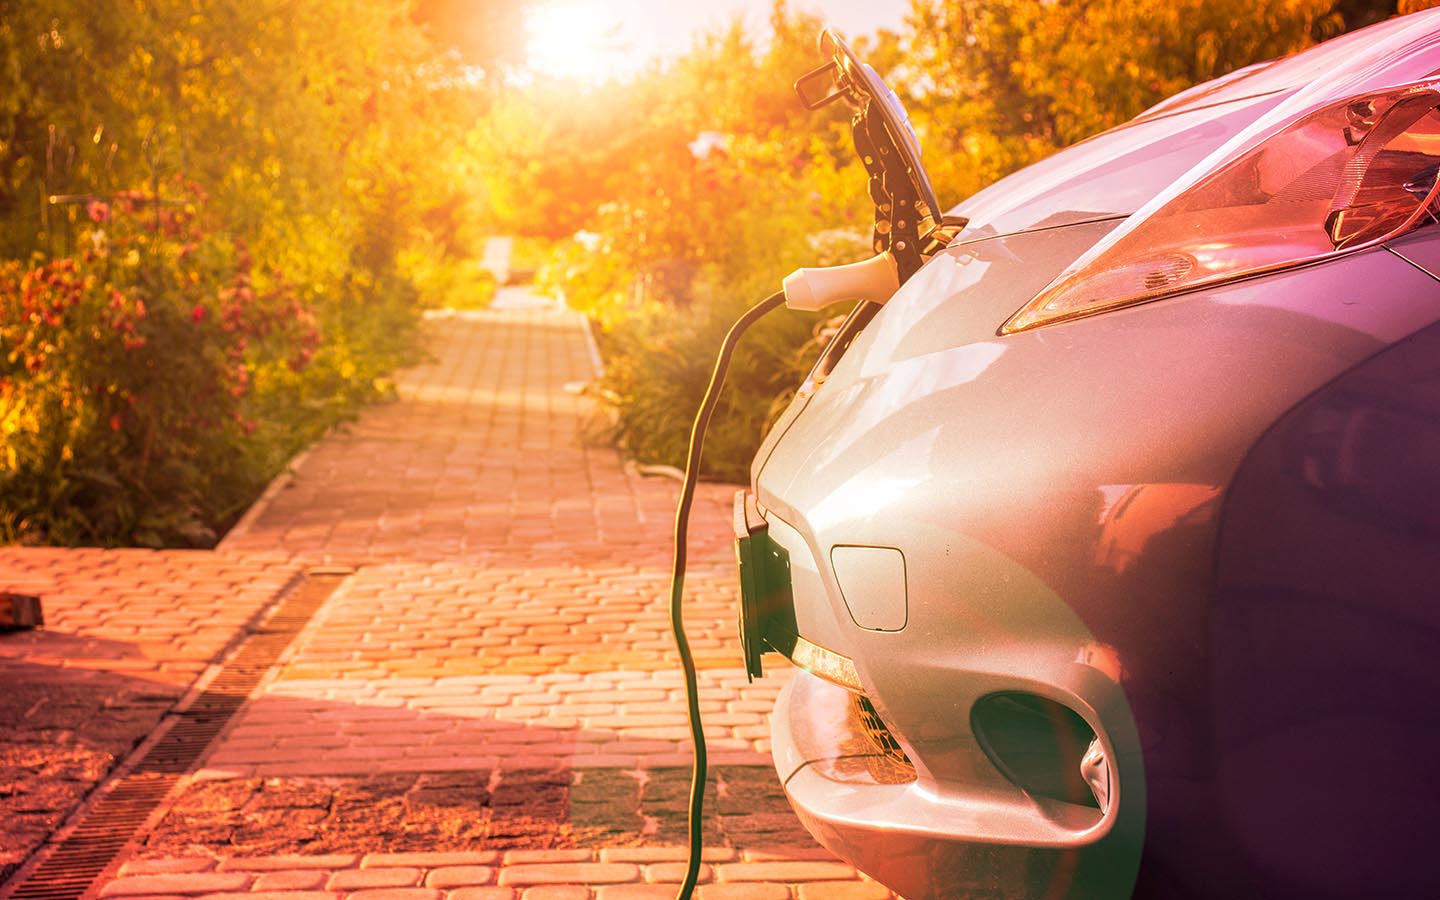 one of the Reasons Your Electric Car is Charging Slowly can be because of extreme heat